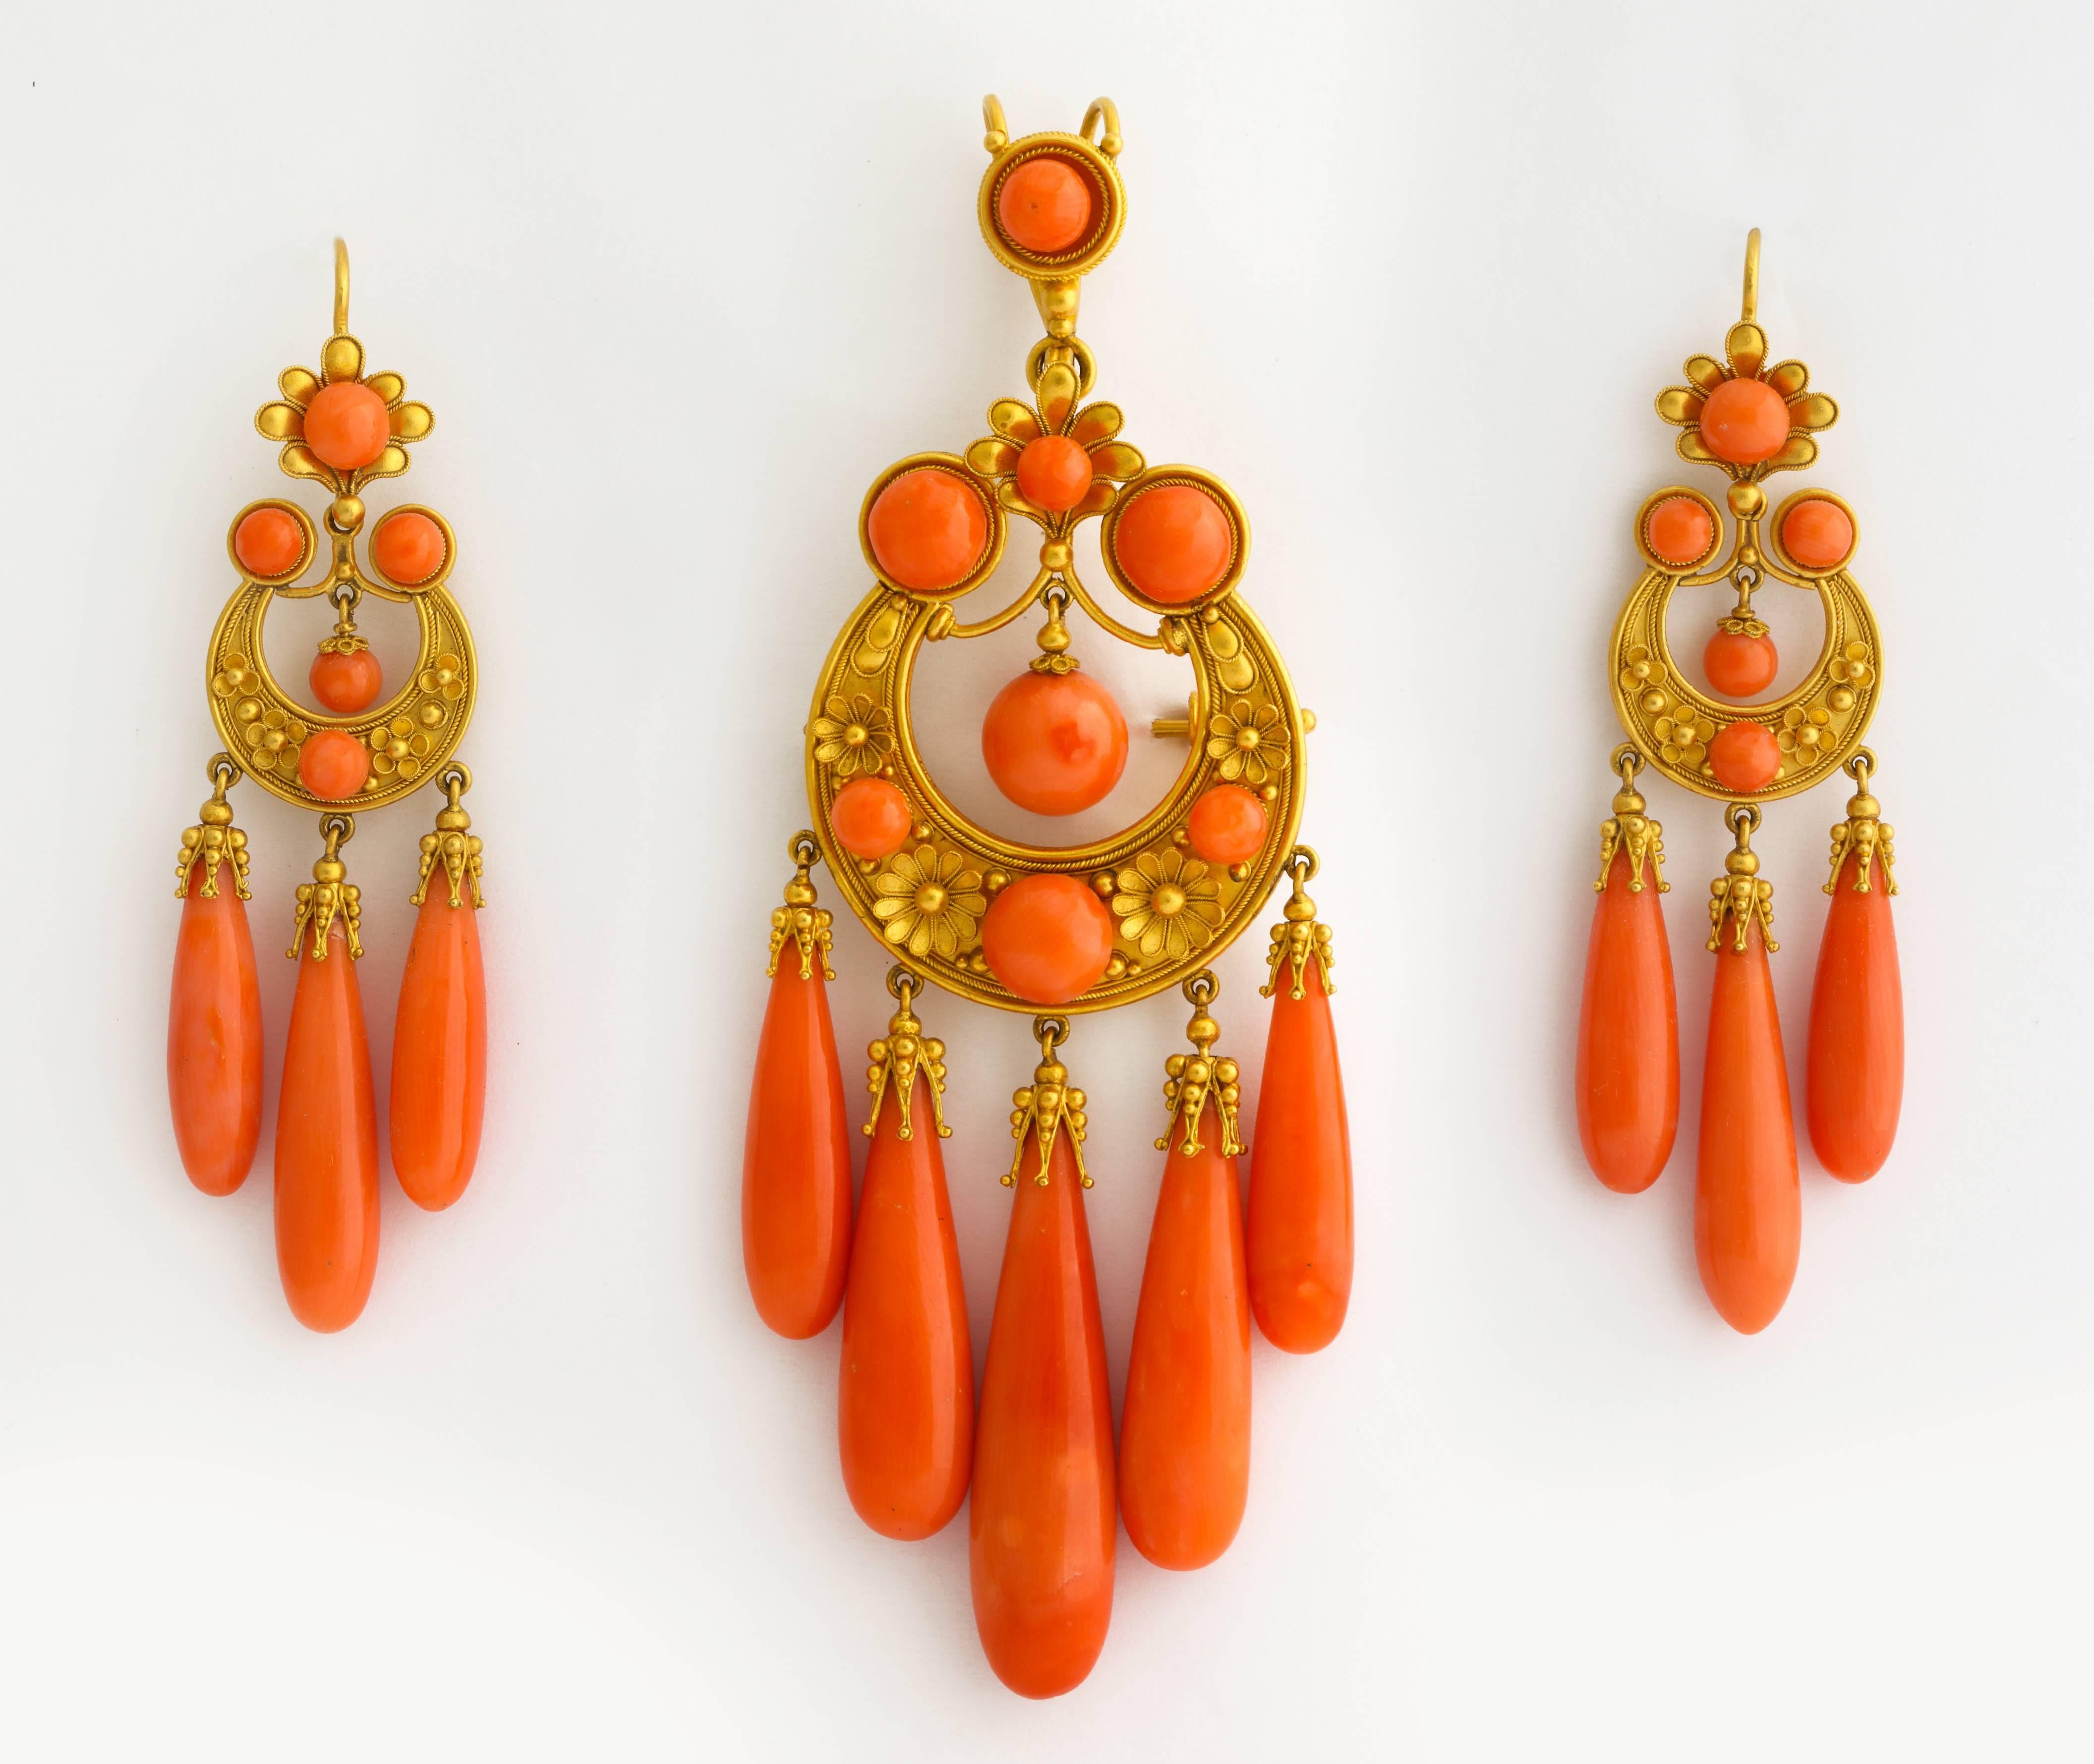 Etruscan Revival 1850s Carved Coral and Gold Pendant Brooch and Earrings Suite For Sale